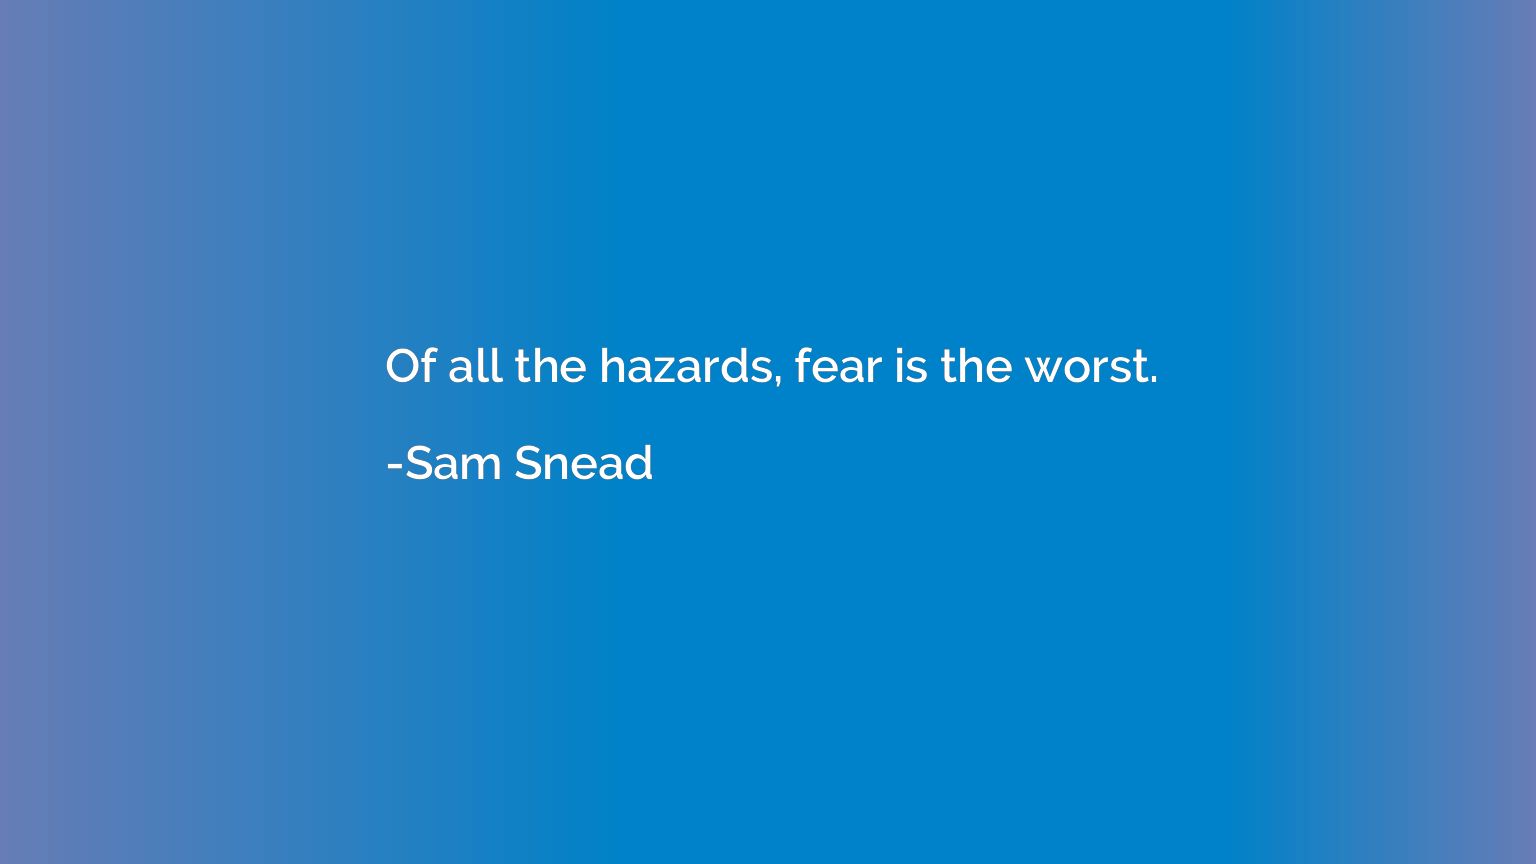 Of all the hazards, fear is the worst.